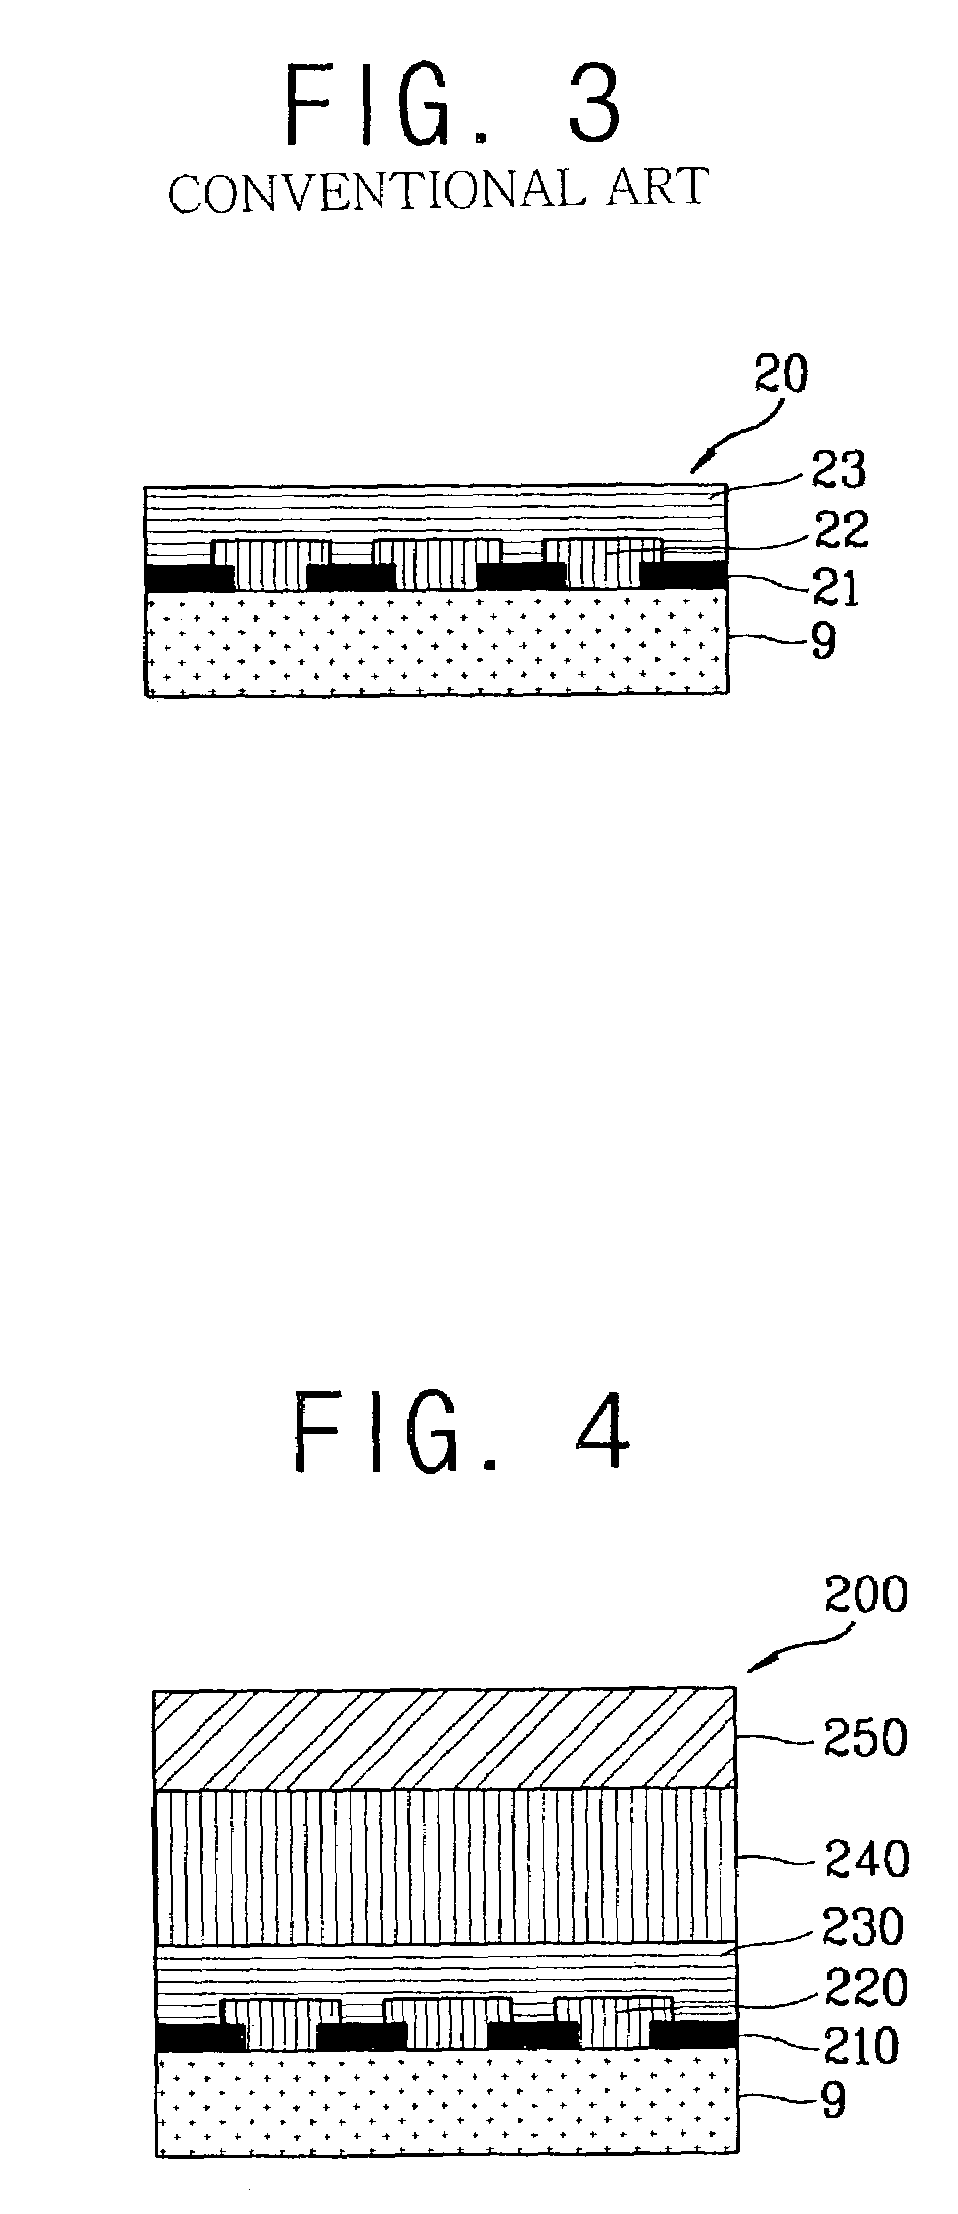 Element for a color flat panel display